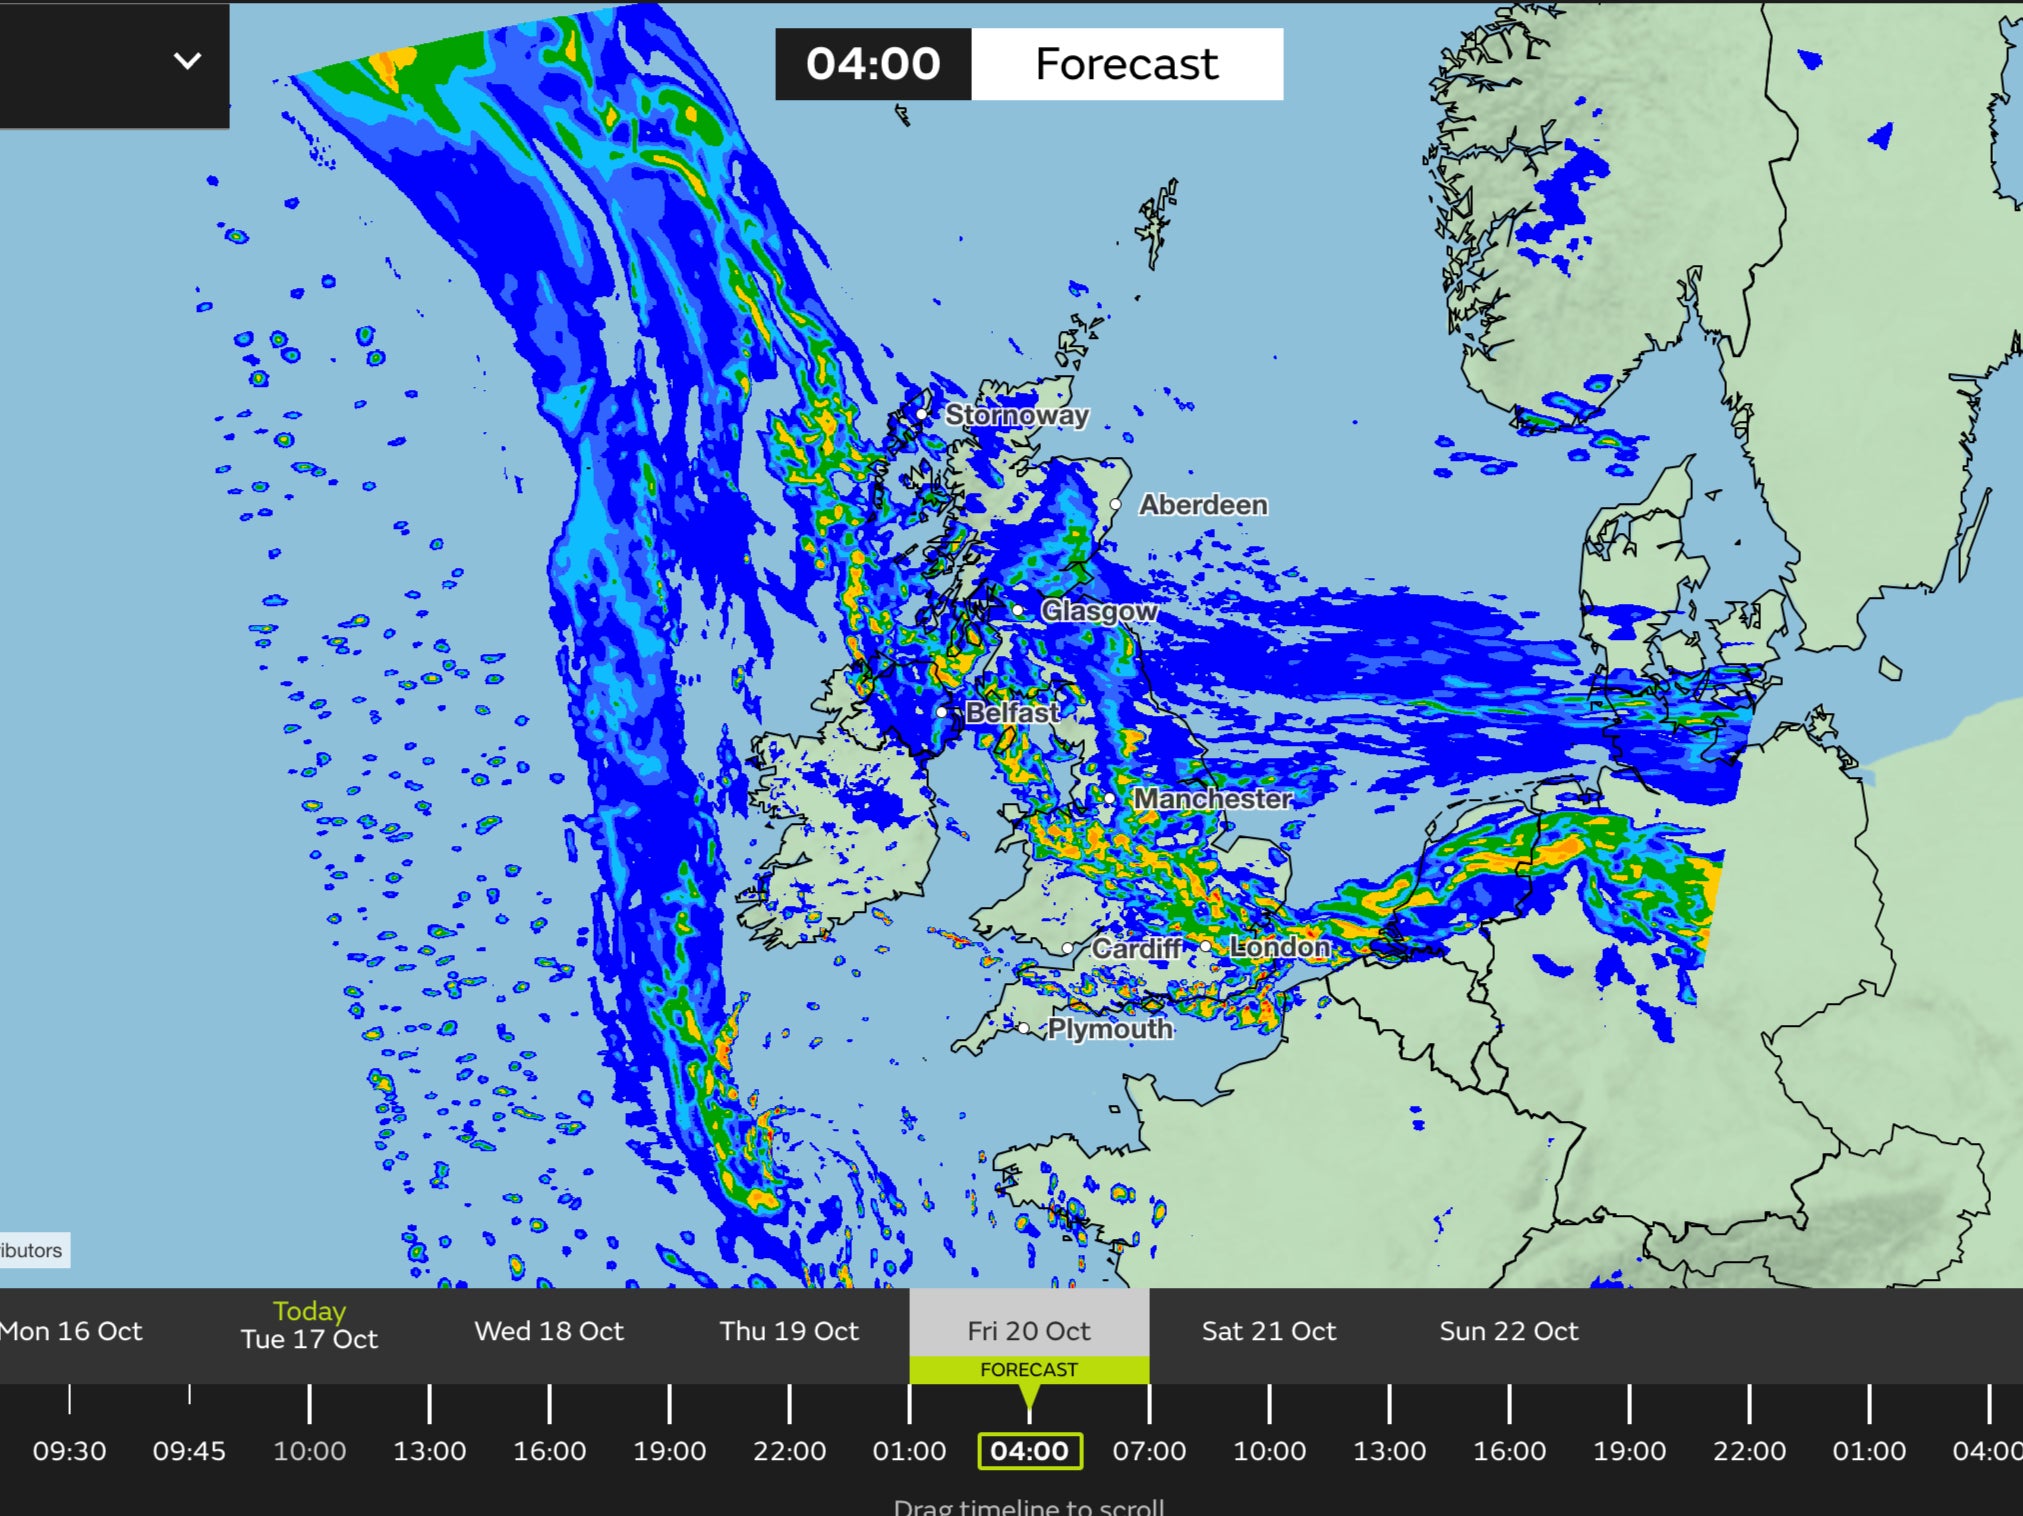 By early Friday morning, Britons will still be experiencing wet weather as we head into the weekend.